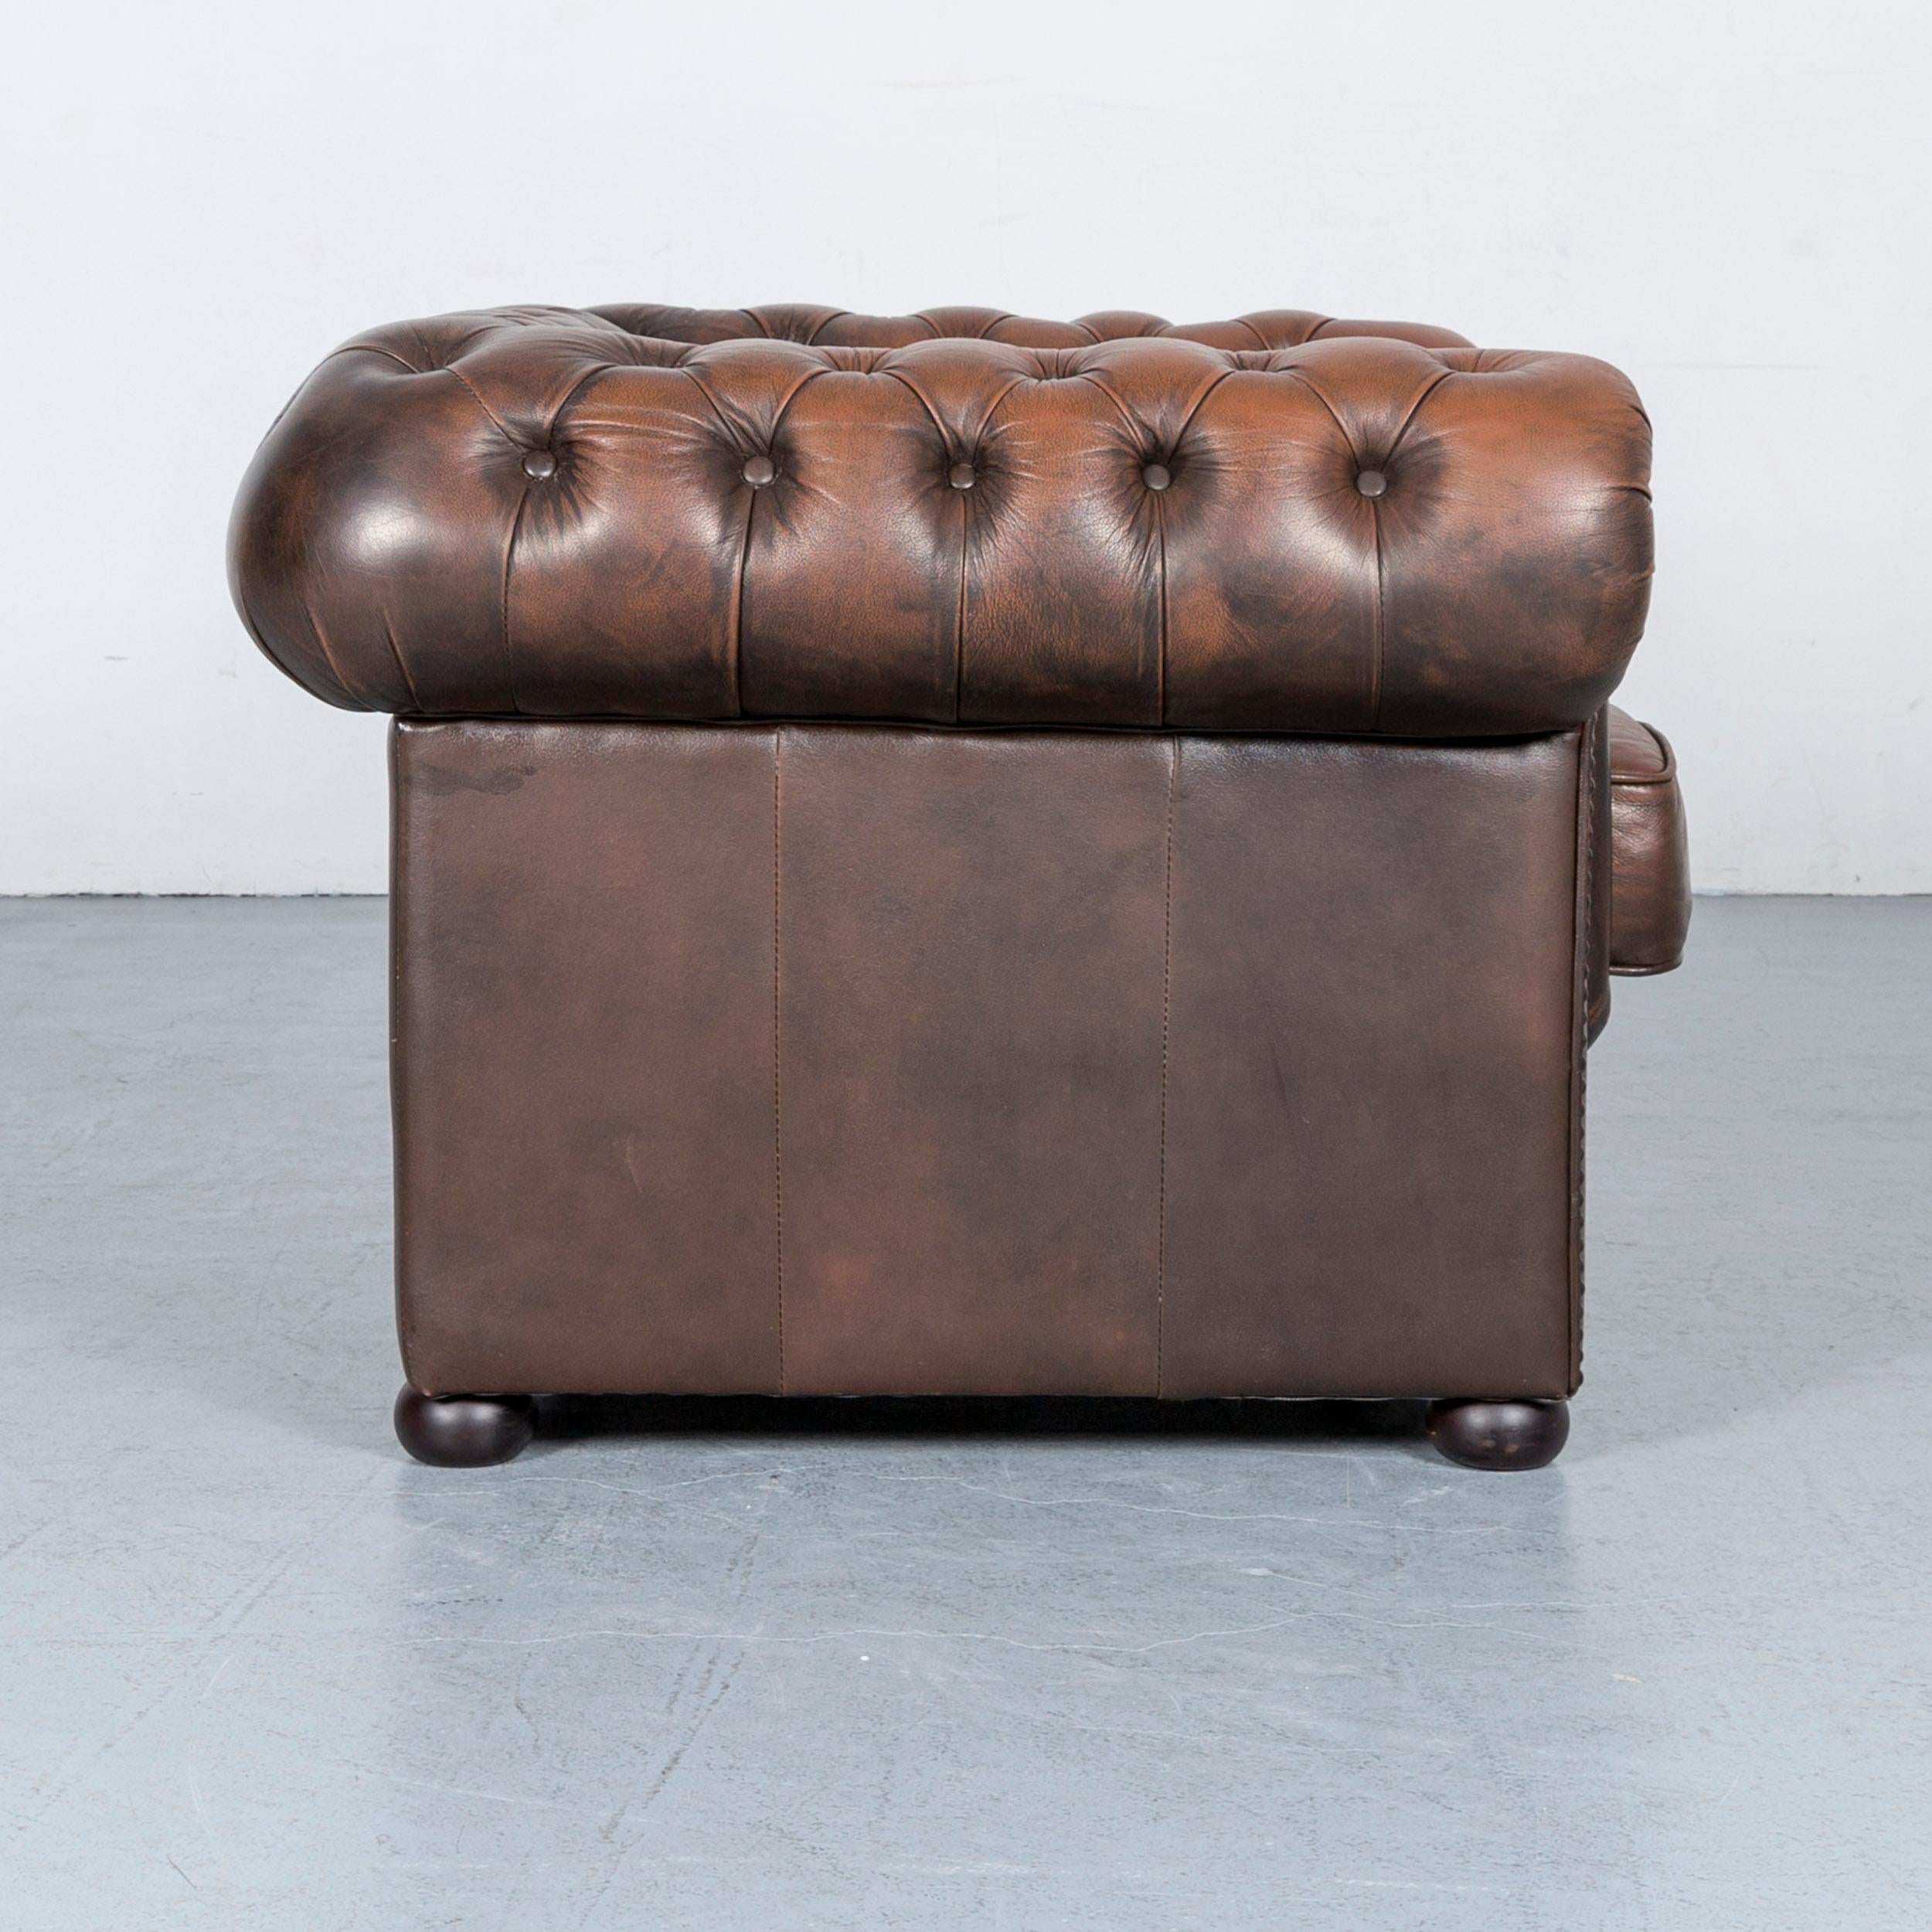 Contemporary Chesterfield Leather Armchair Brown One-Seat Club-Chair